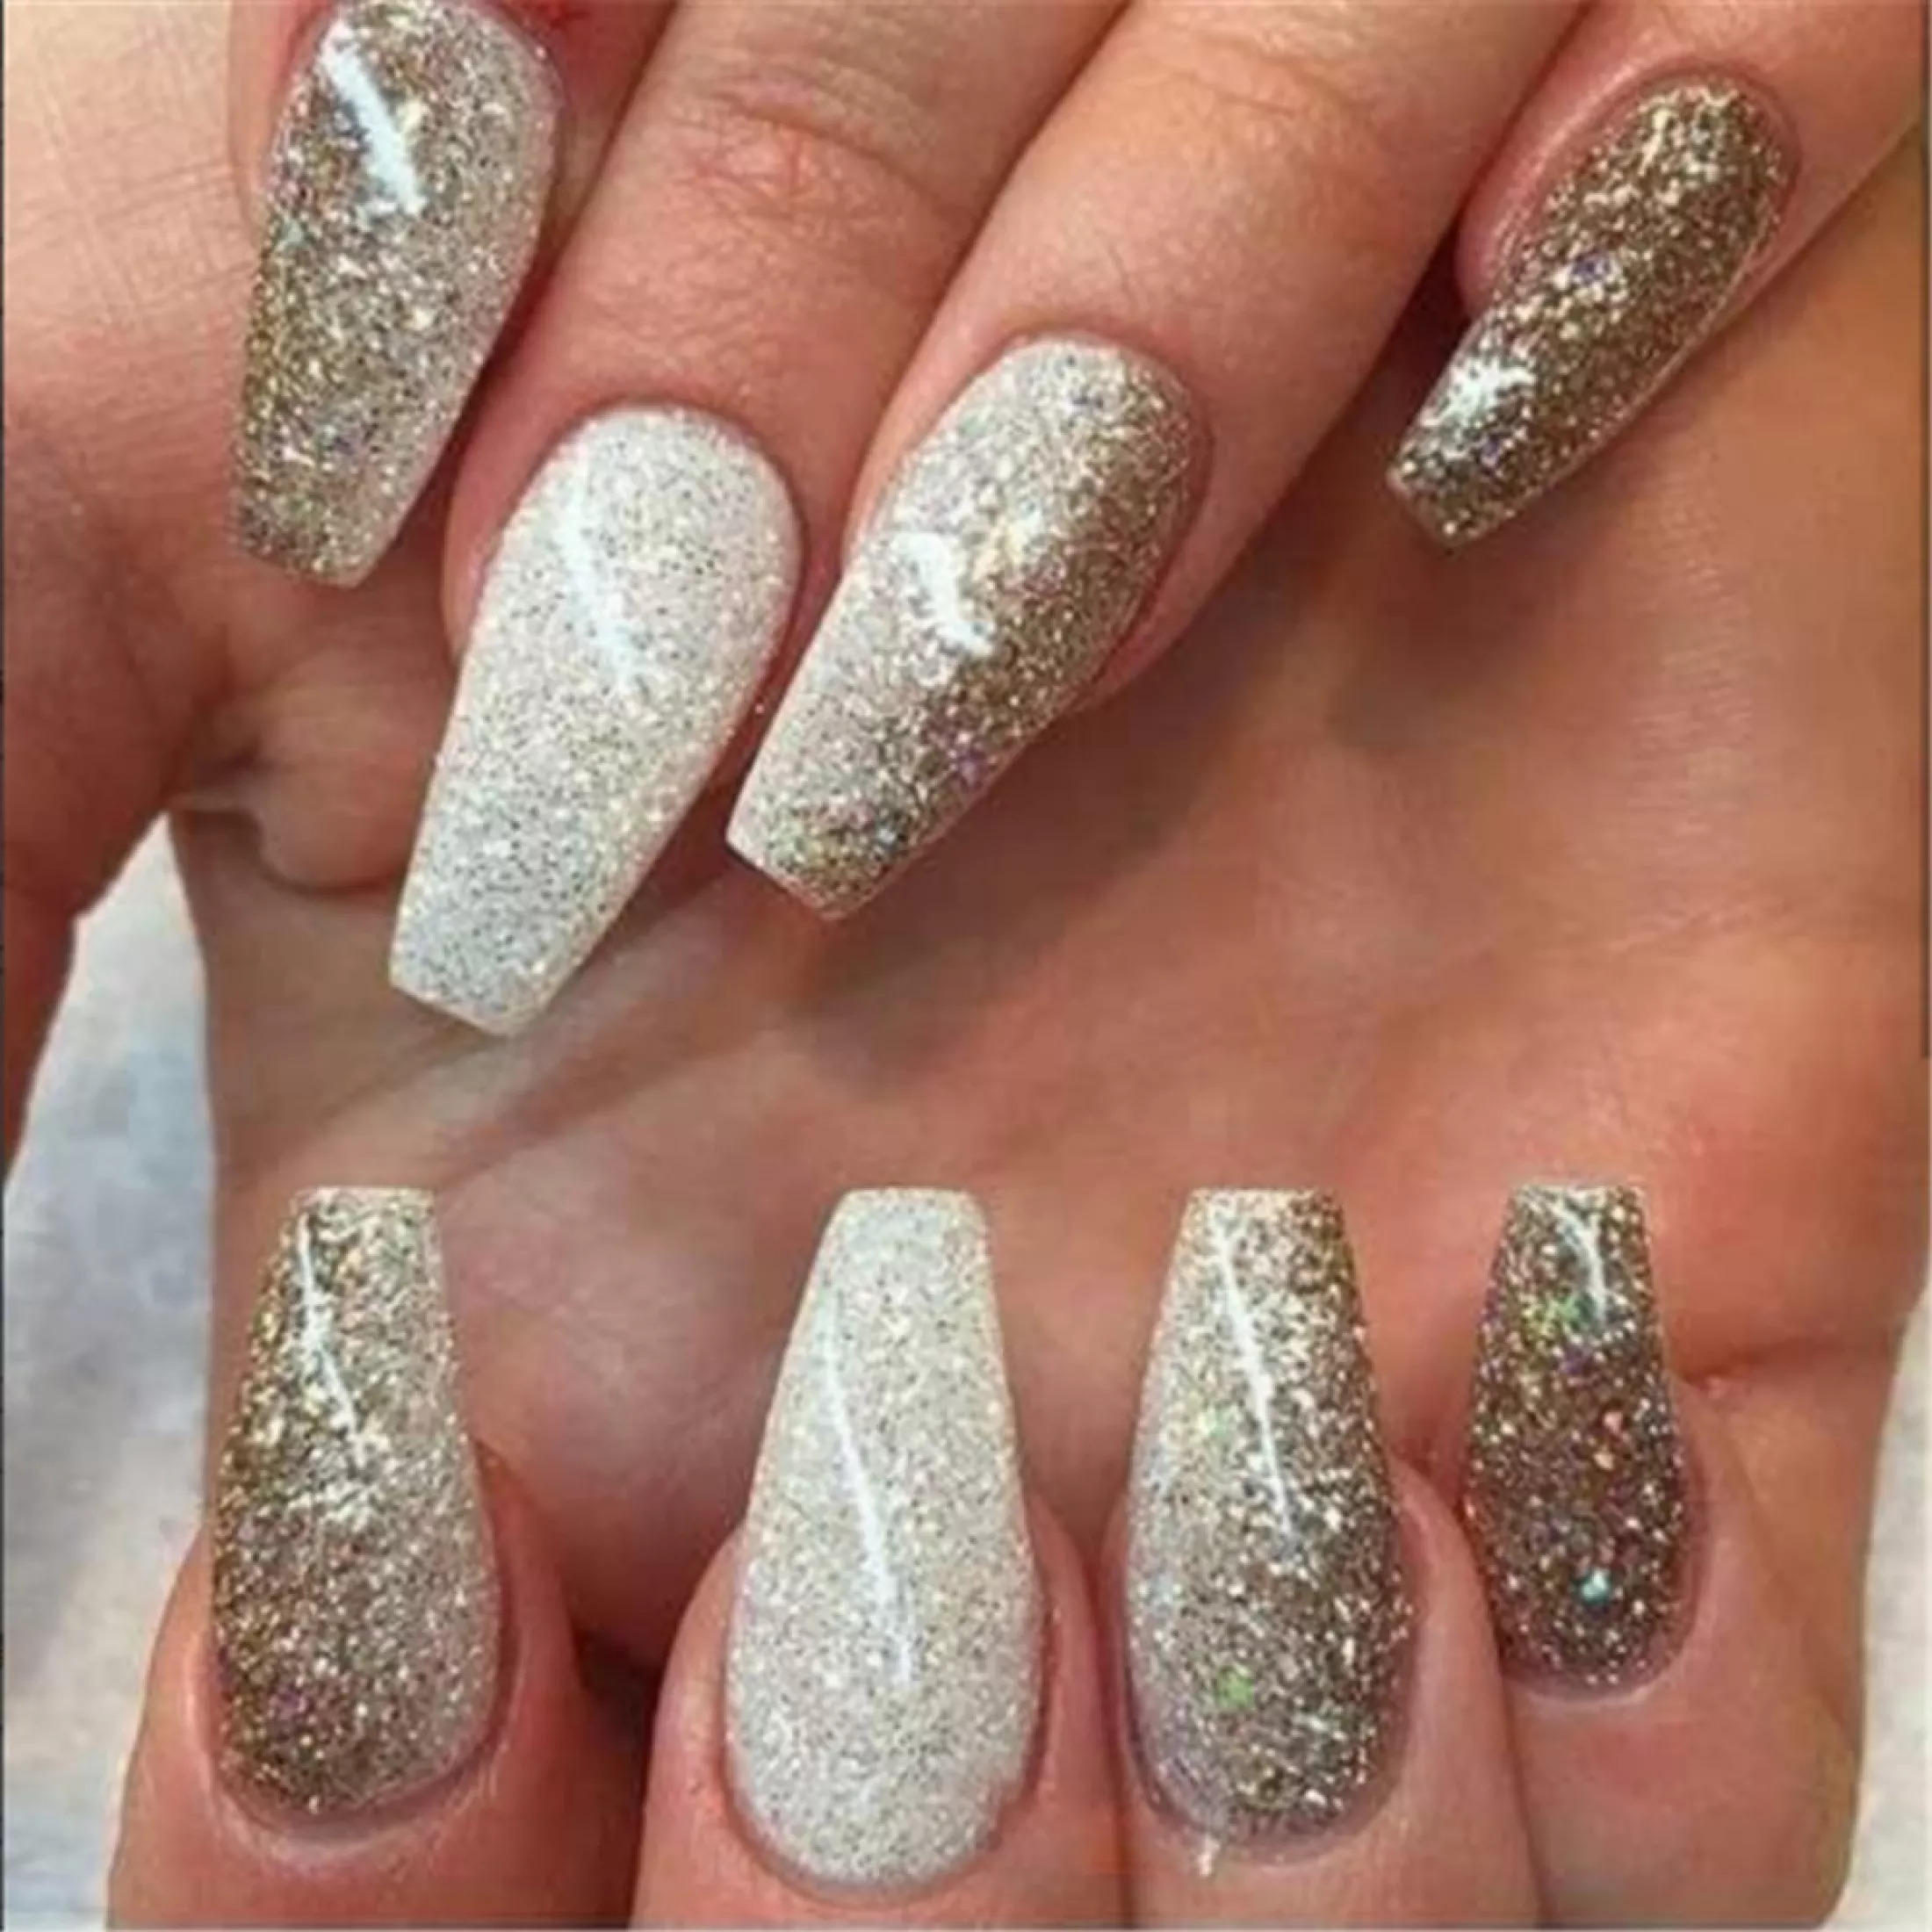 18 Bridal Wedding Nail Designs for Brides - The Trend Spotter